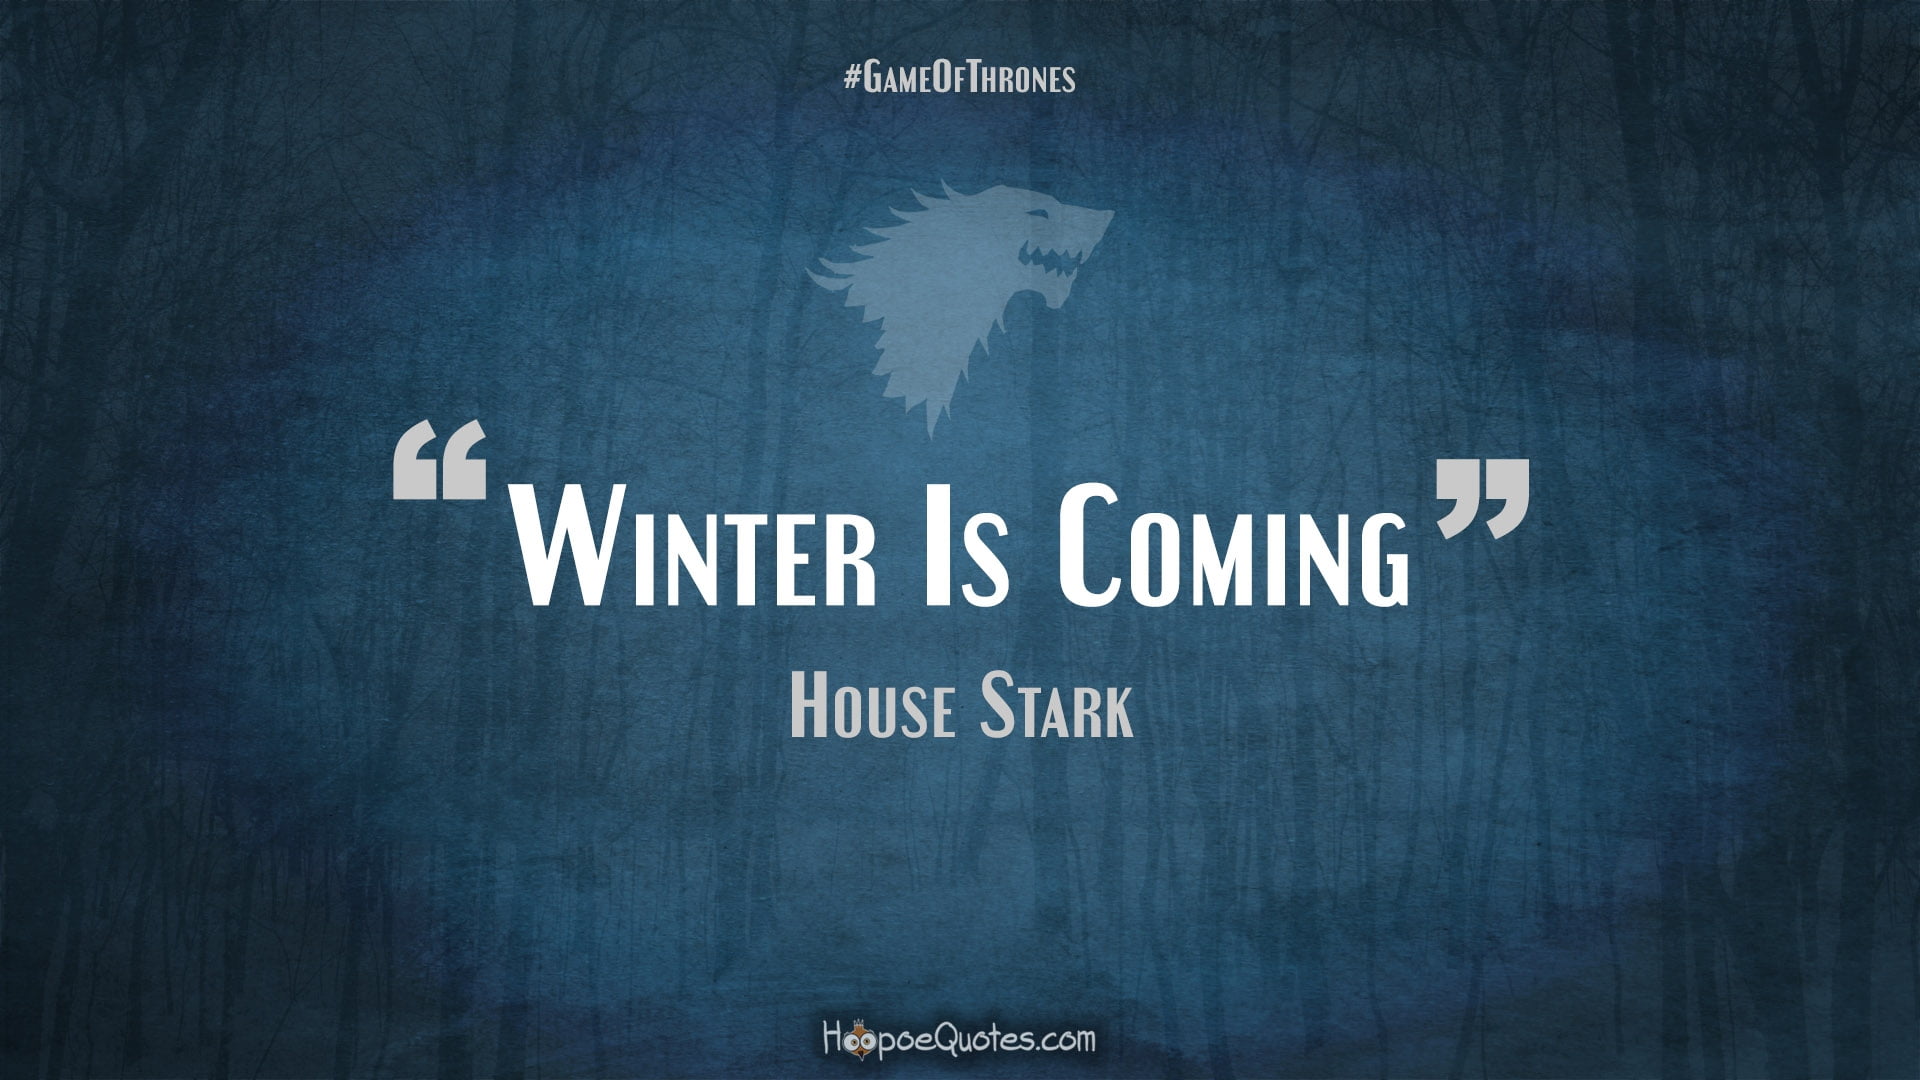 Winter is coming text, A Song of Ice and Fire, House Stark, Ned Stark, benjen stark